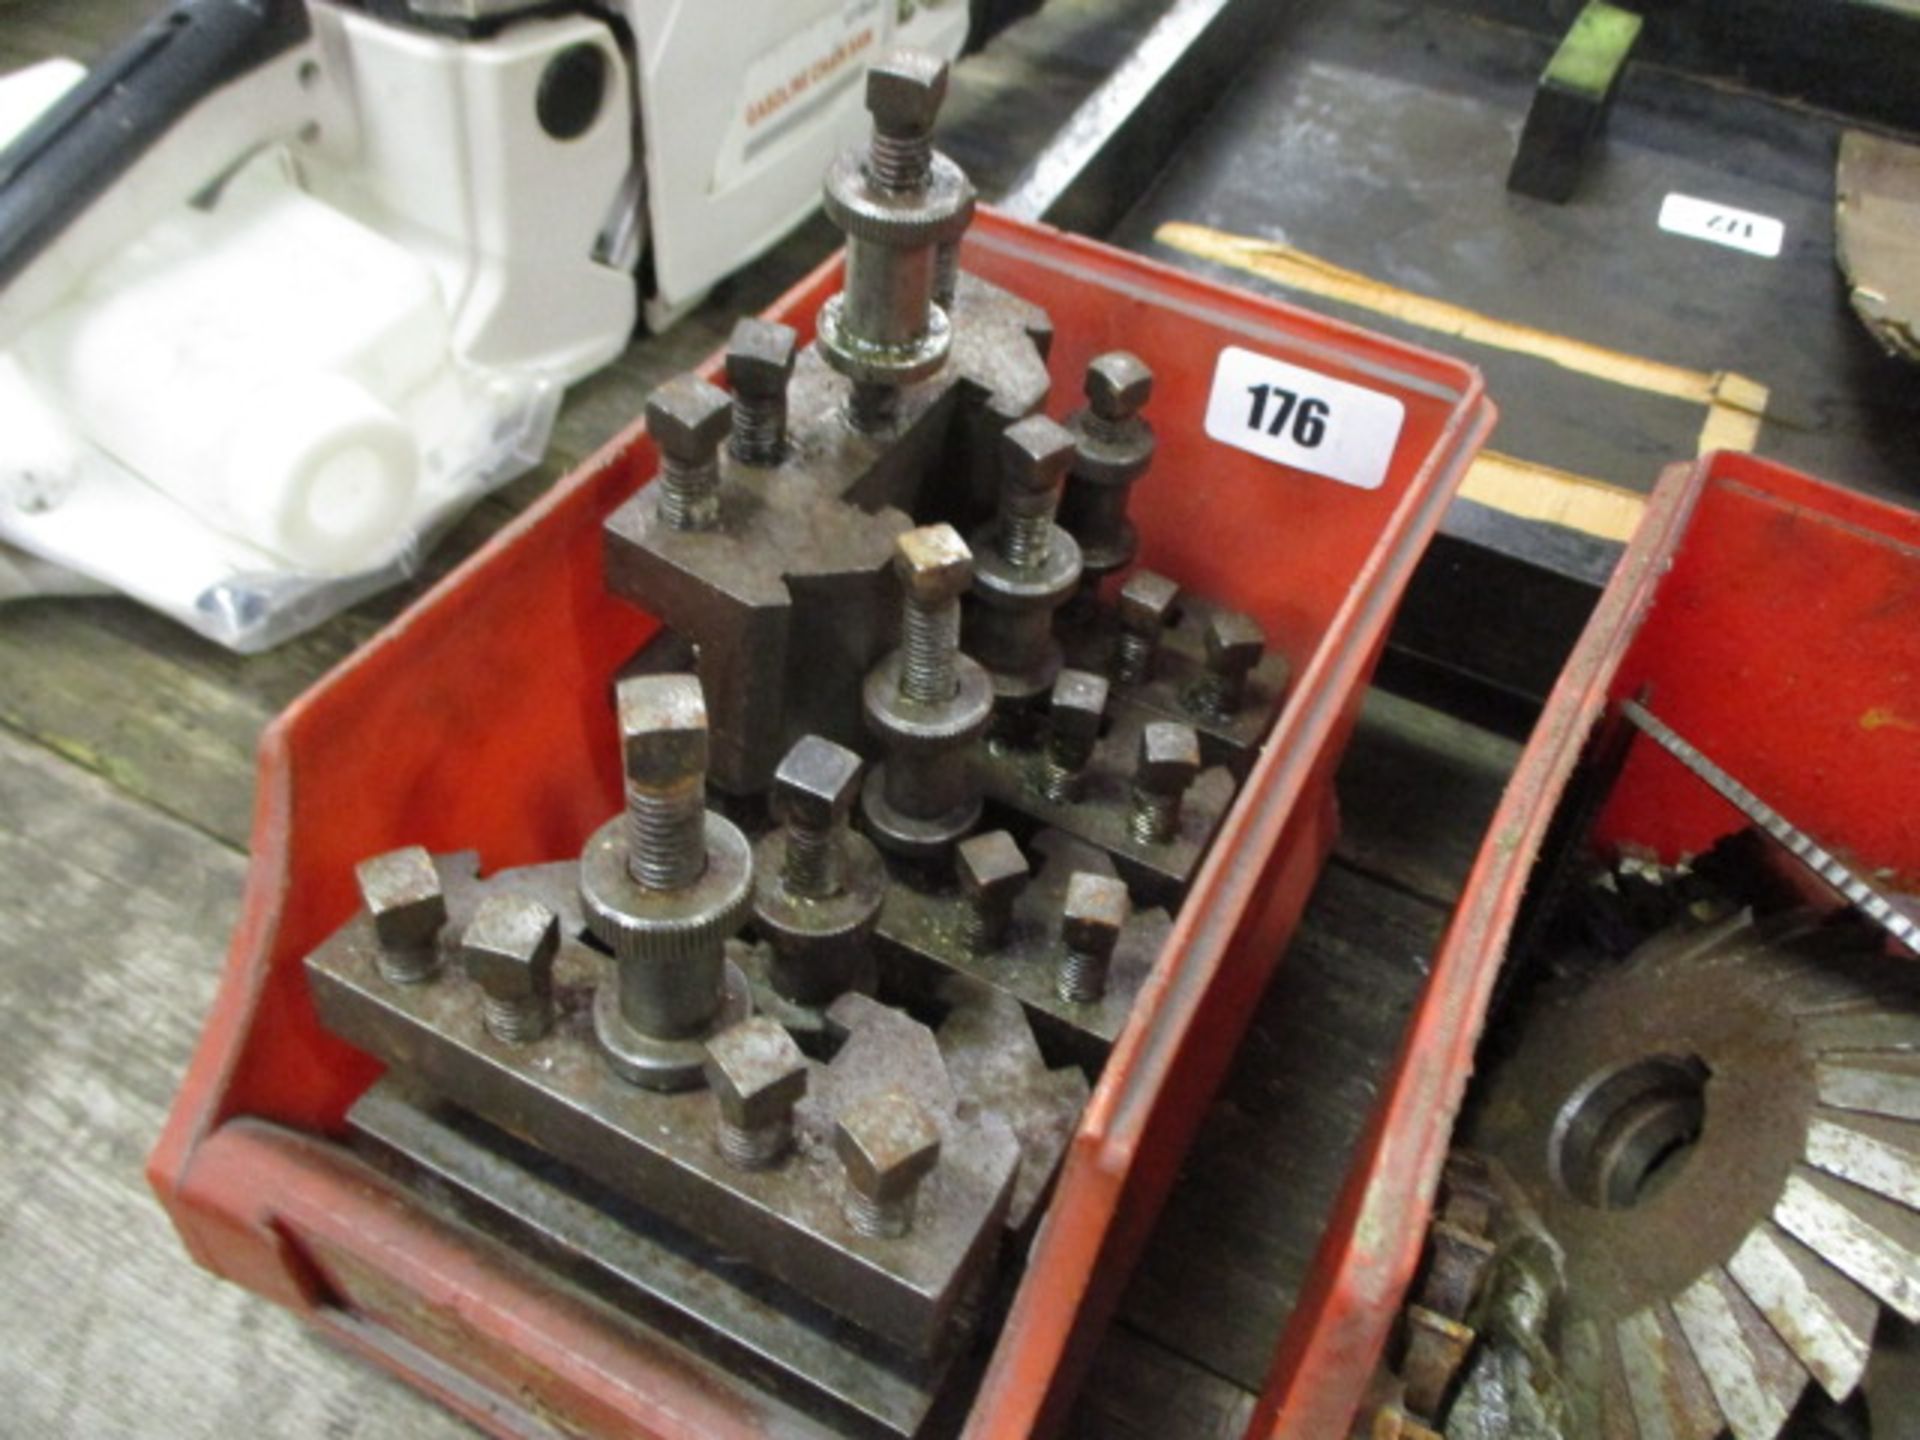 Small linbin containing machine table clamps